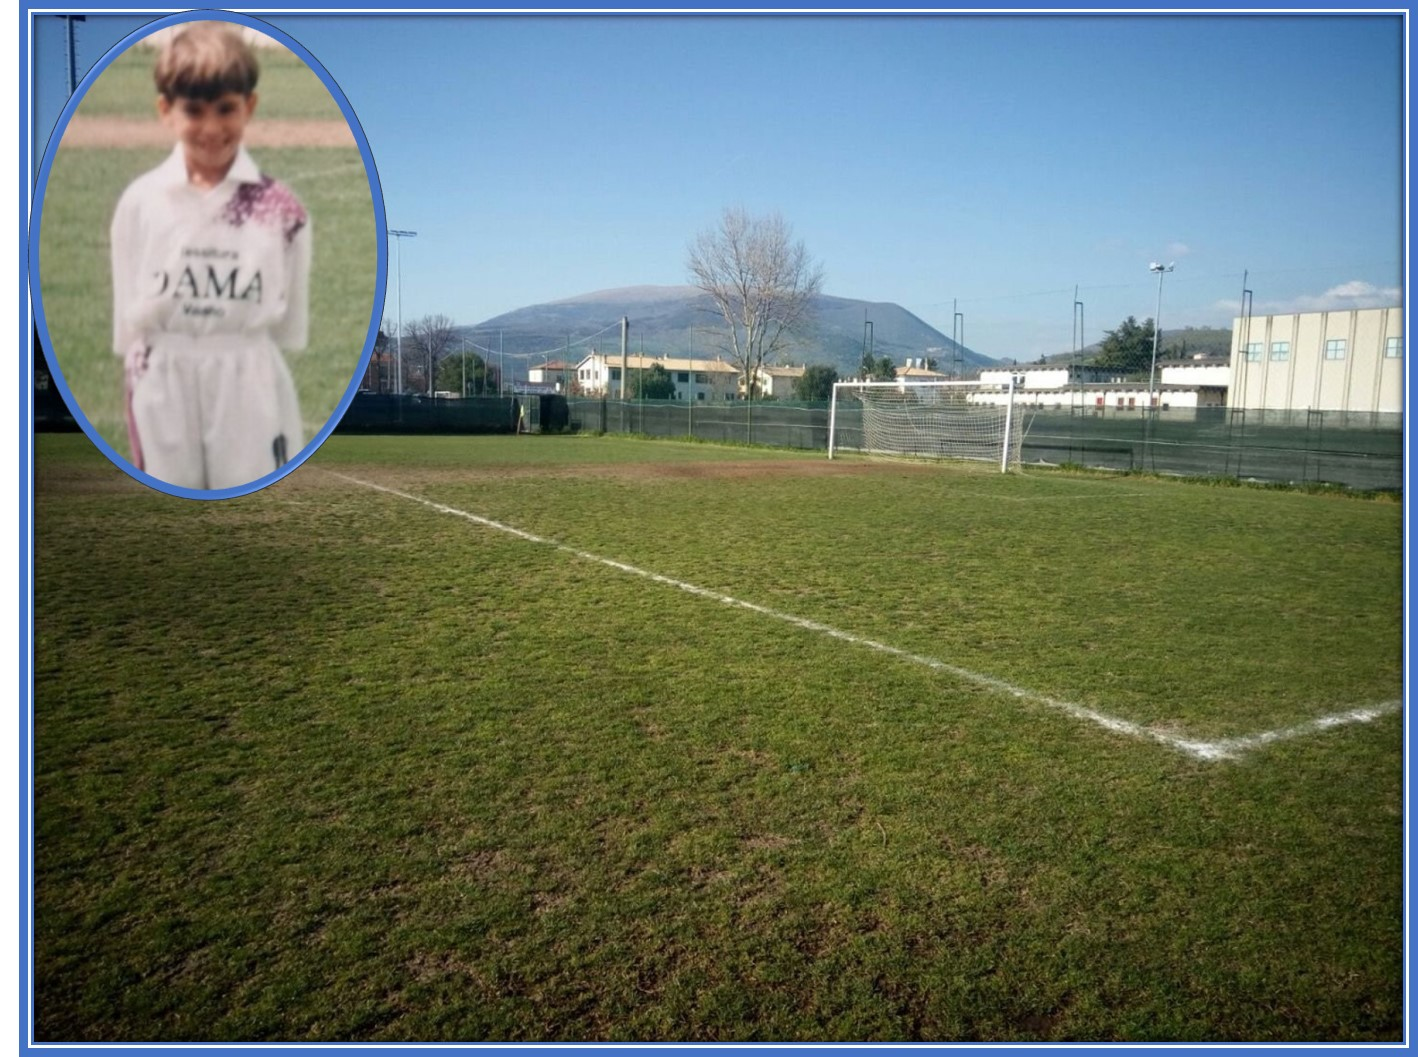 Behold the pitch where he had his humble beginning. It thus brings back memories for Leonardo